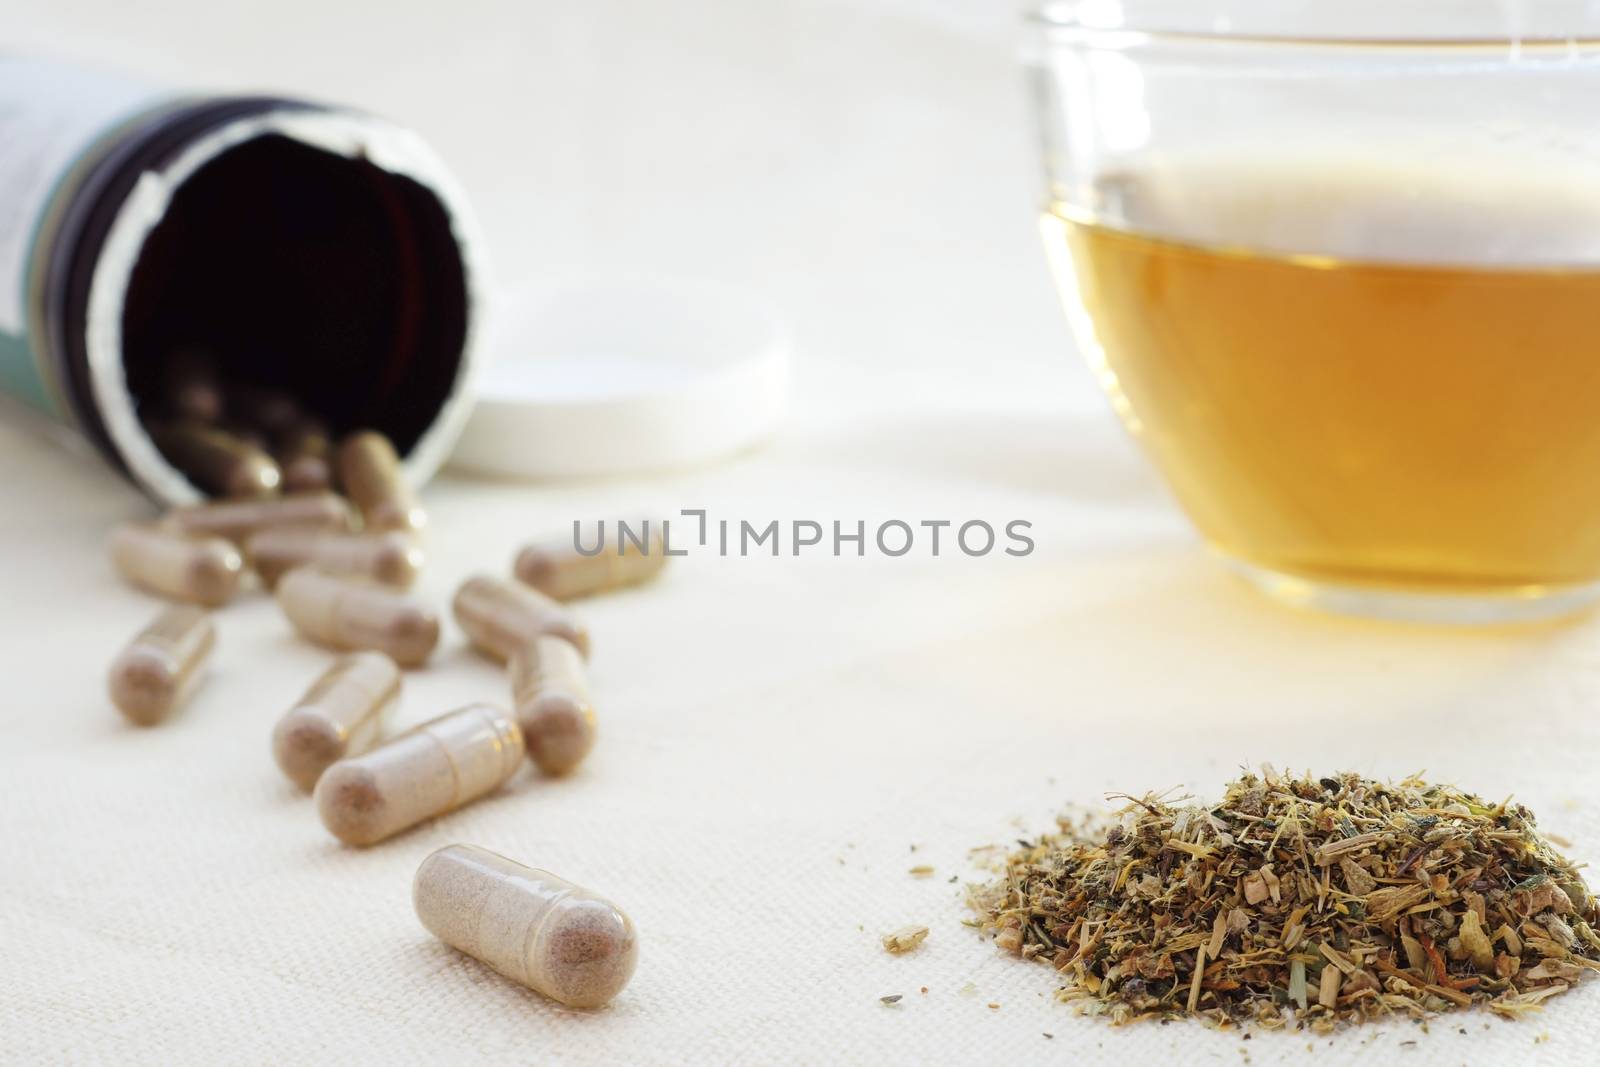 mixture of dried herbs with herbal tea and herbal pills by designer491